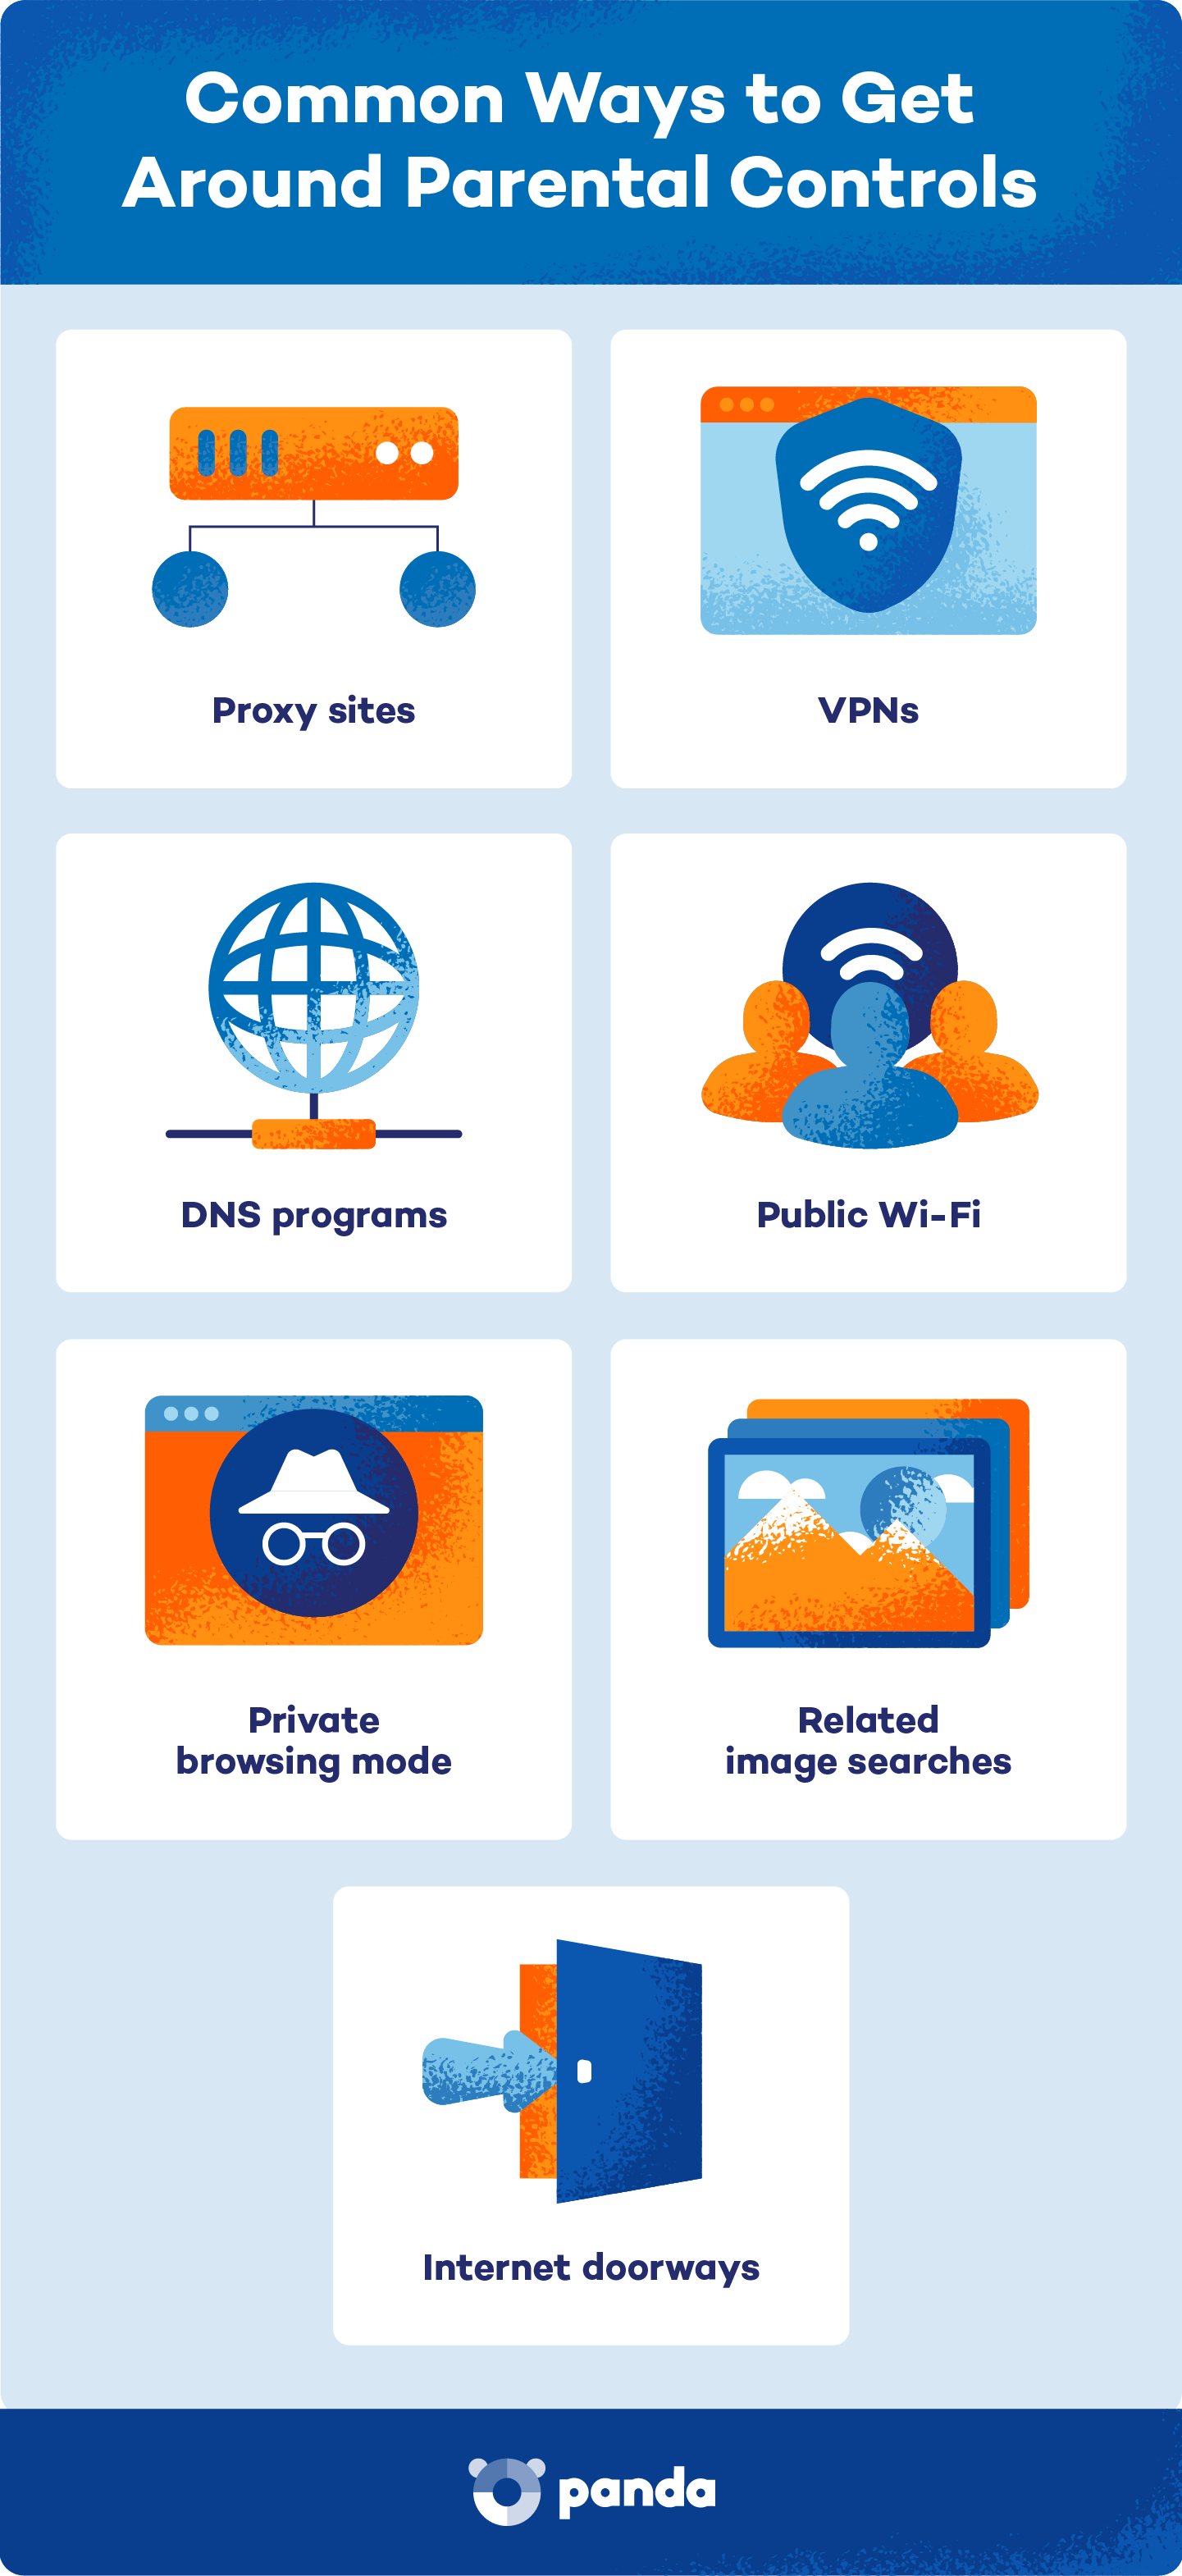 Illustration showing common ways to get around parental control on wifi